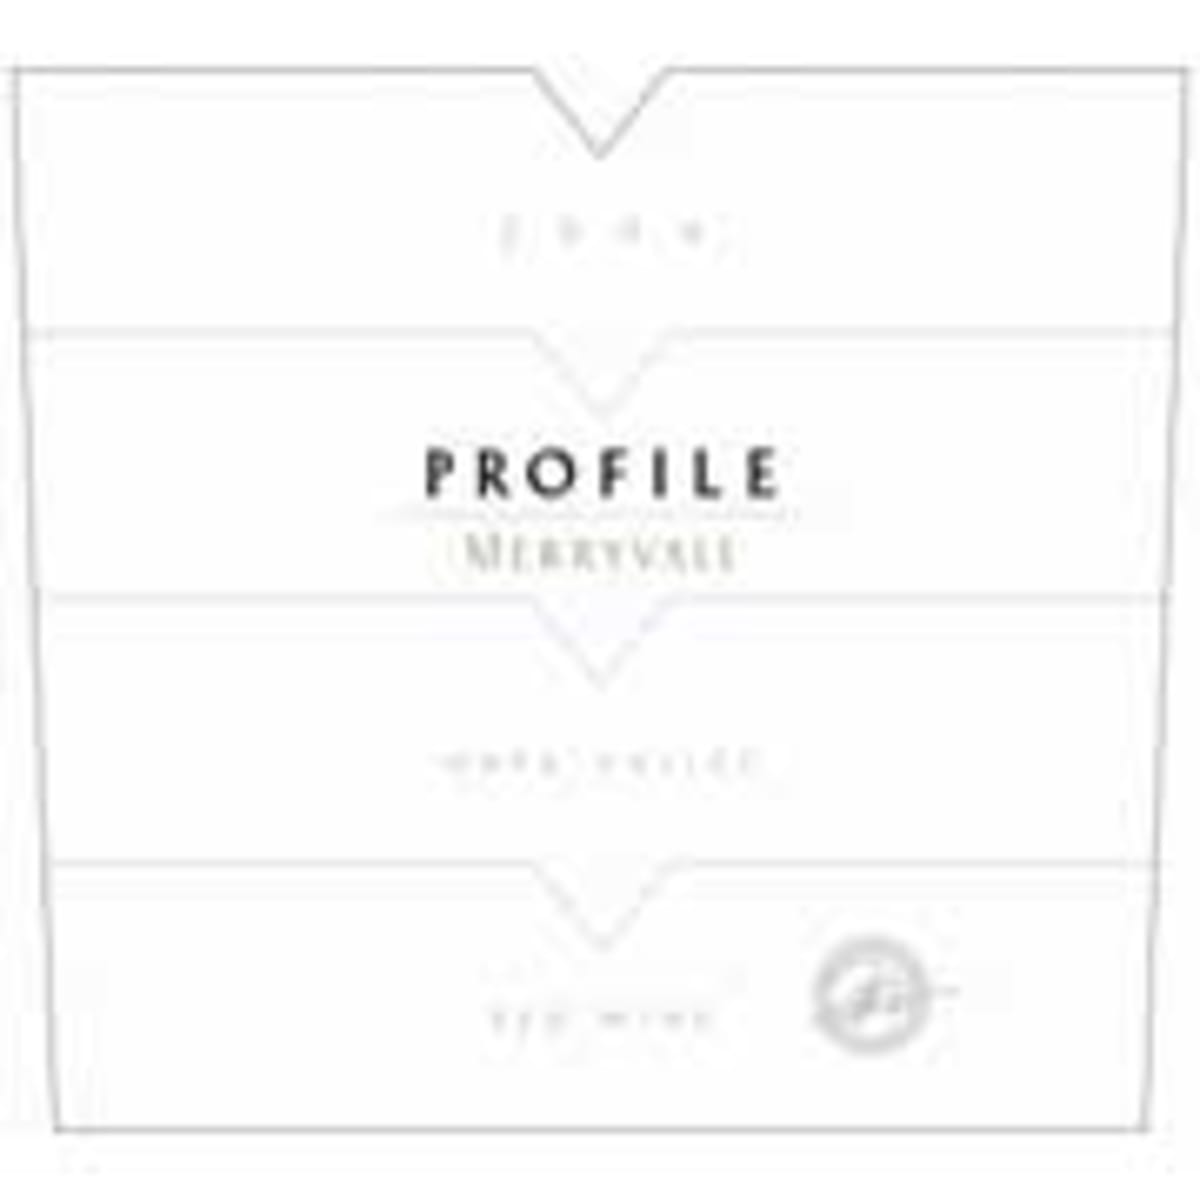 Merryvale Profile 2004 Front Label